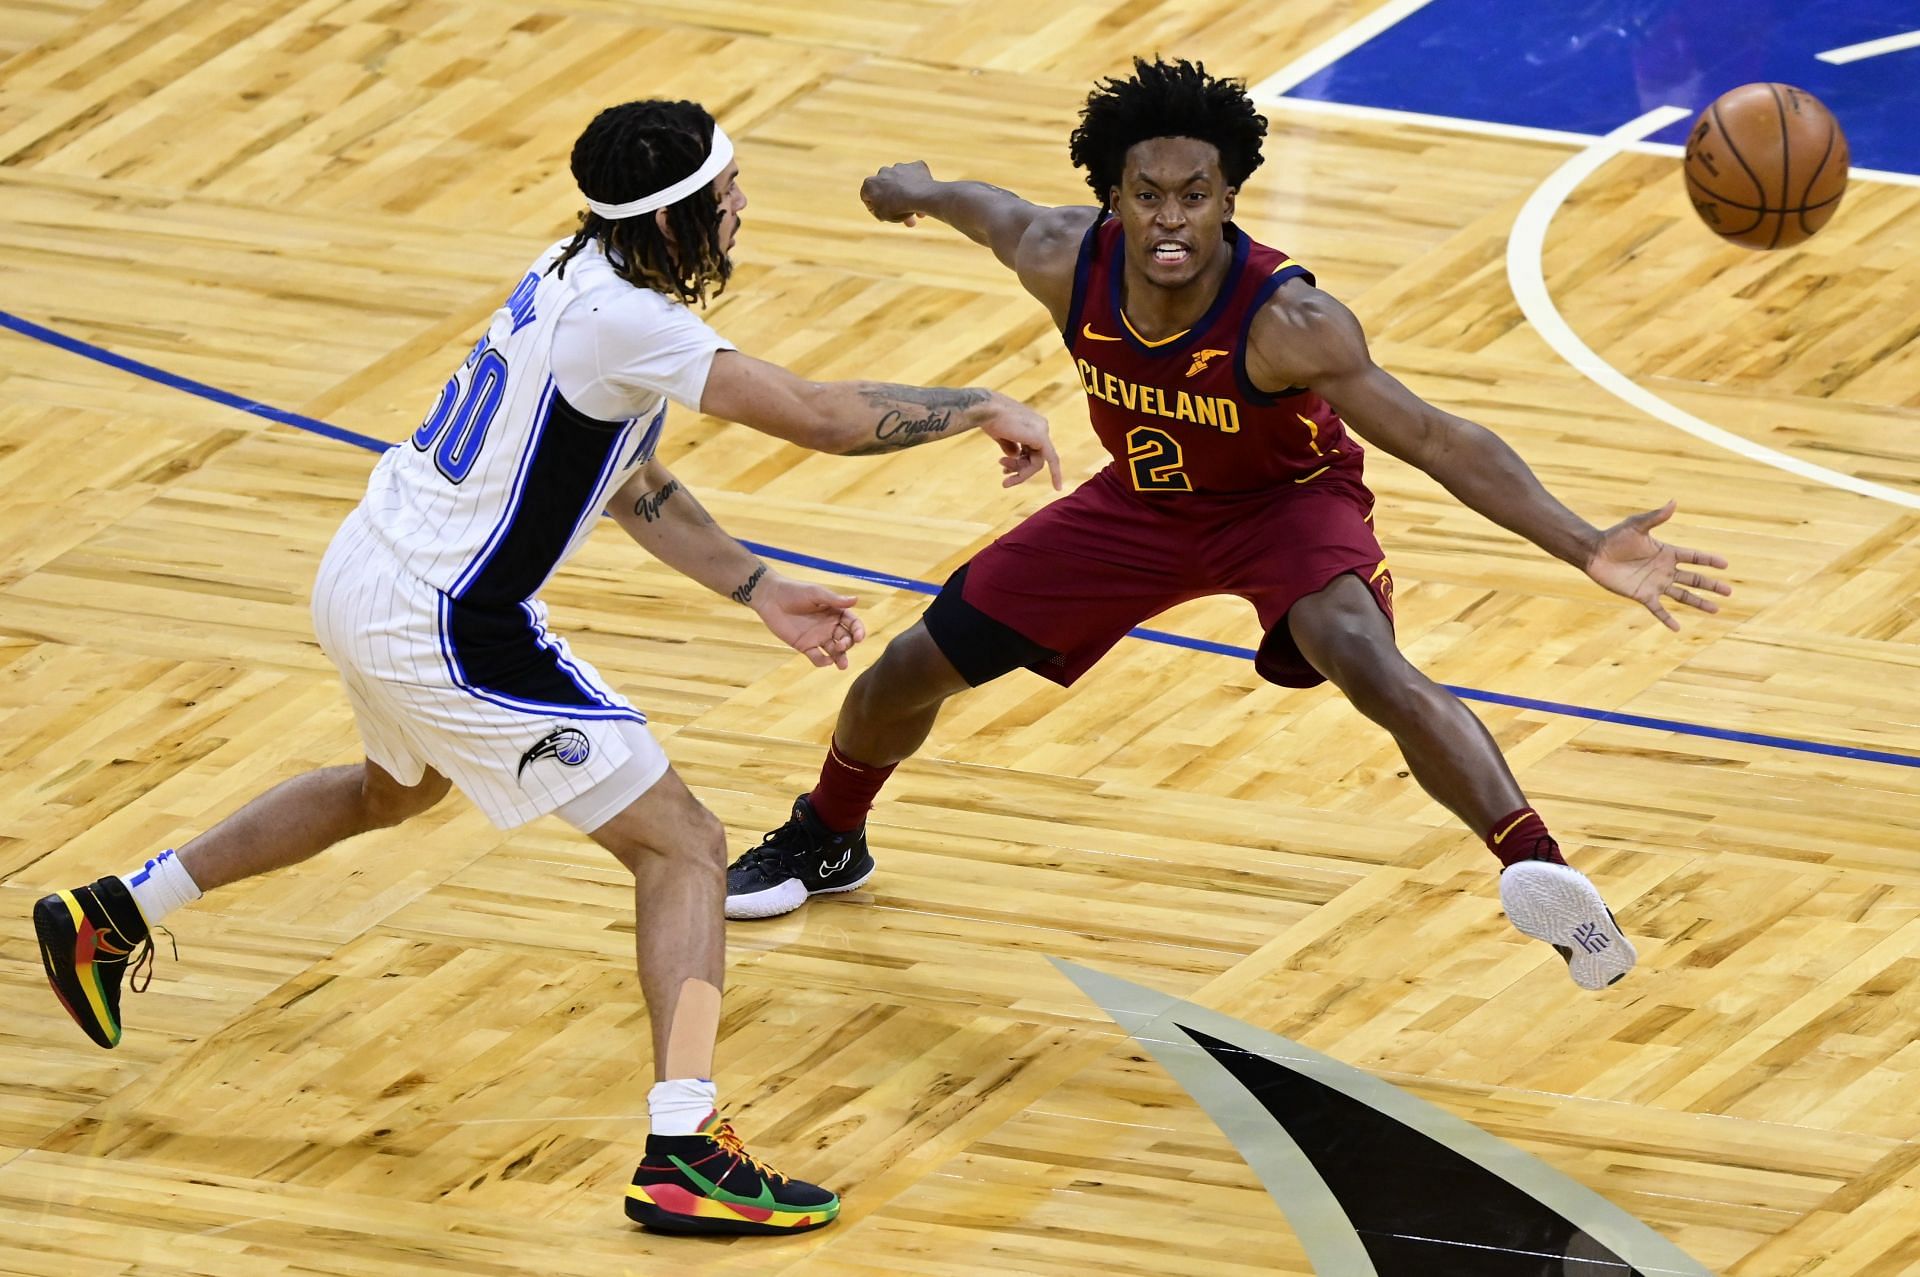 Cleveland Cavaliers will host the Orlando Magic on Saturday.